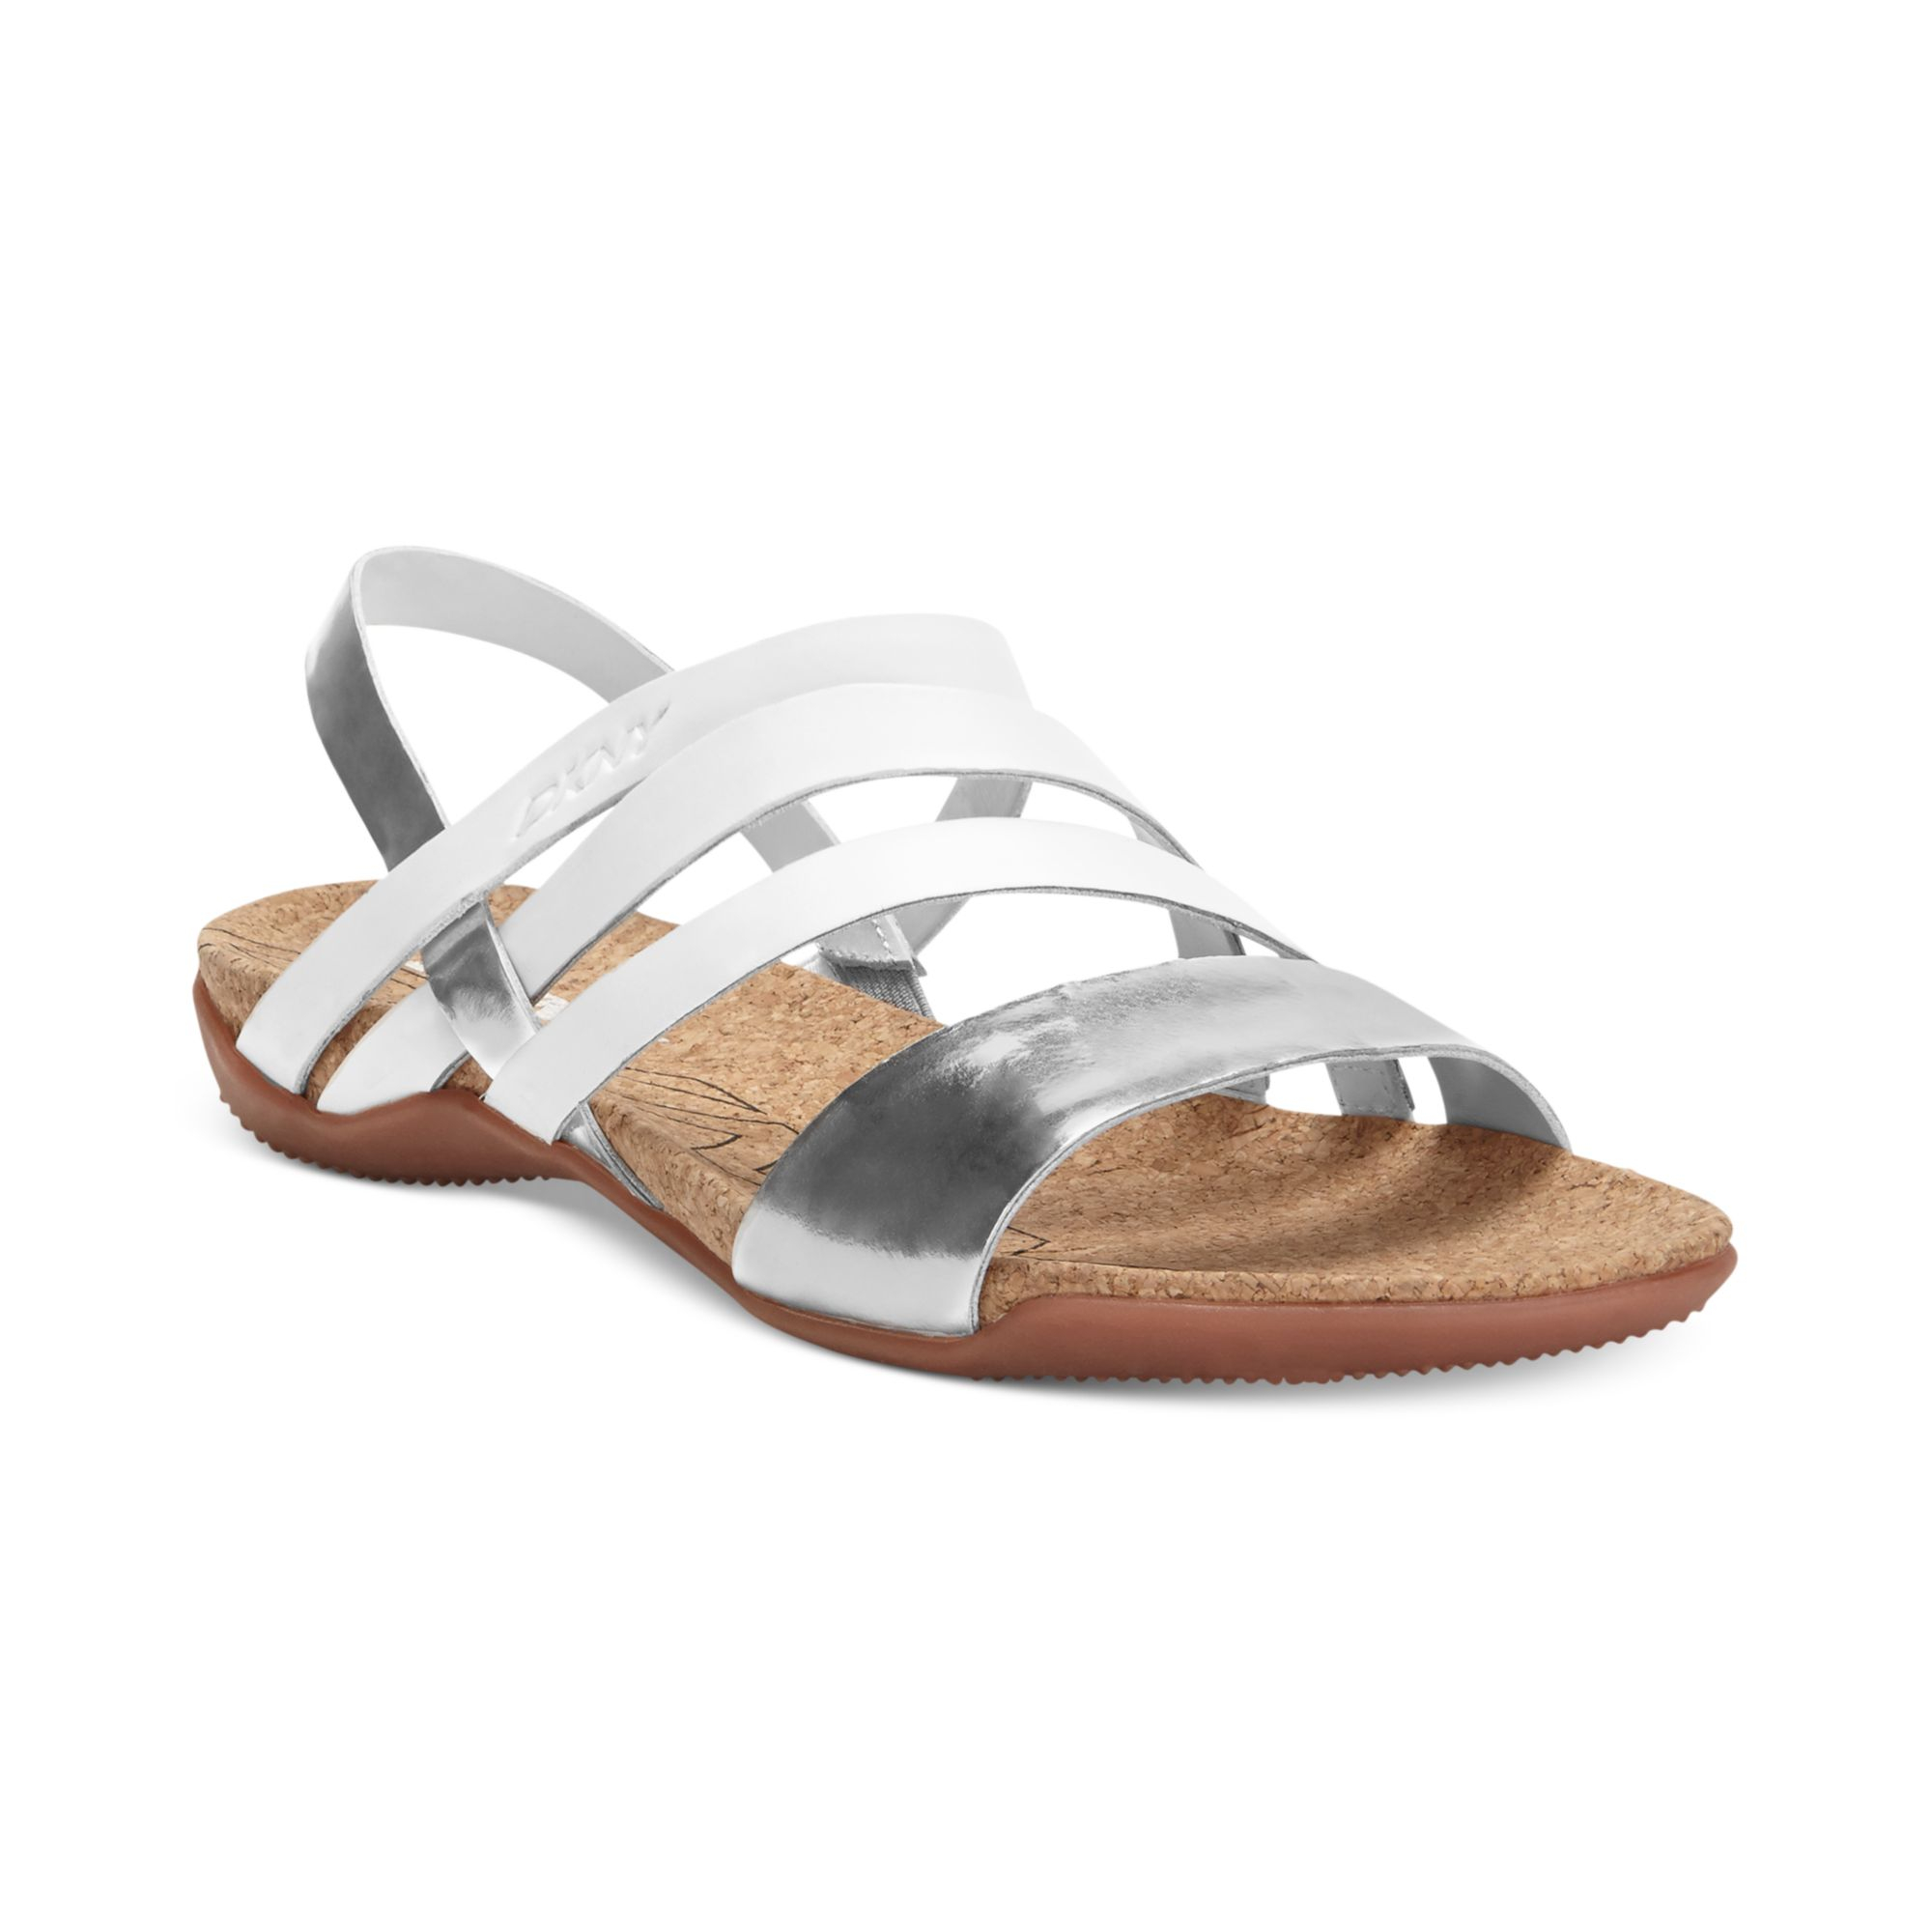 Dkny Sparrow Flat Sandals in Silver (White/Silver) | Lyst